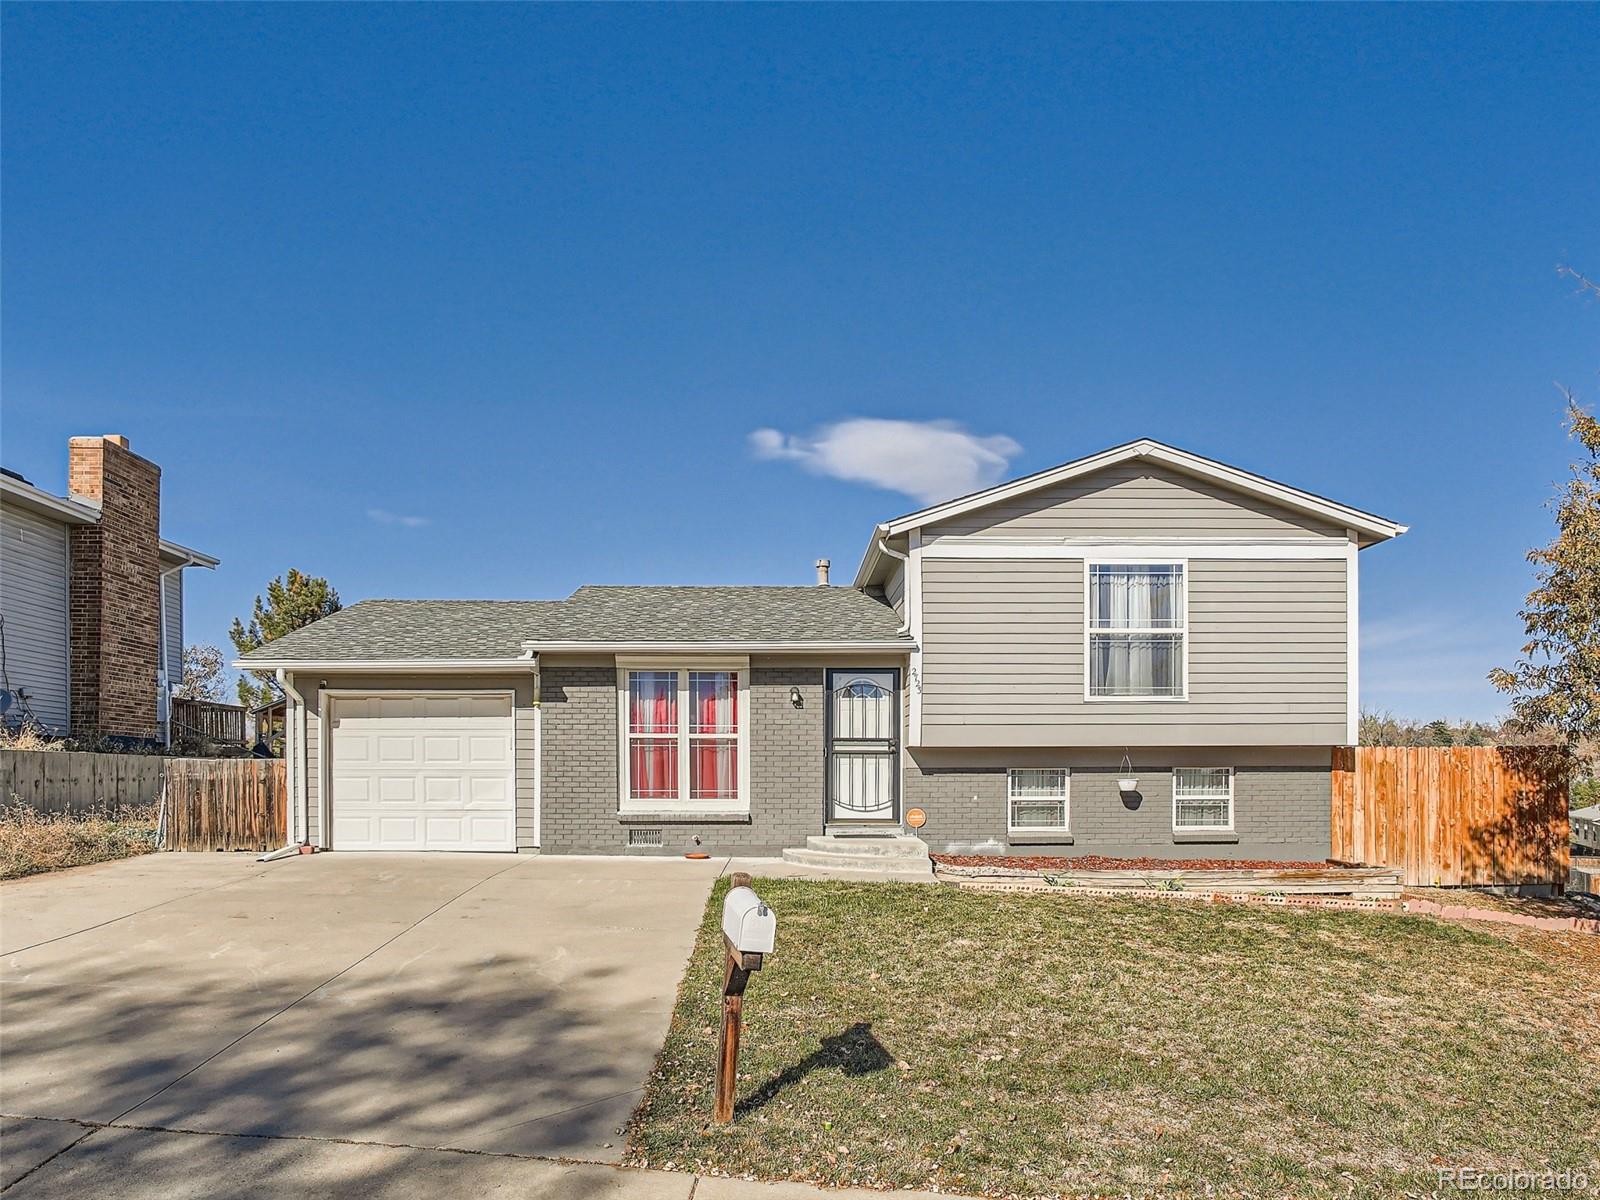 2723 e 96th way, Thornton sold home. Closed on 2024-02-16 for $465,000.